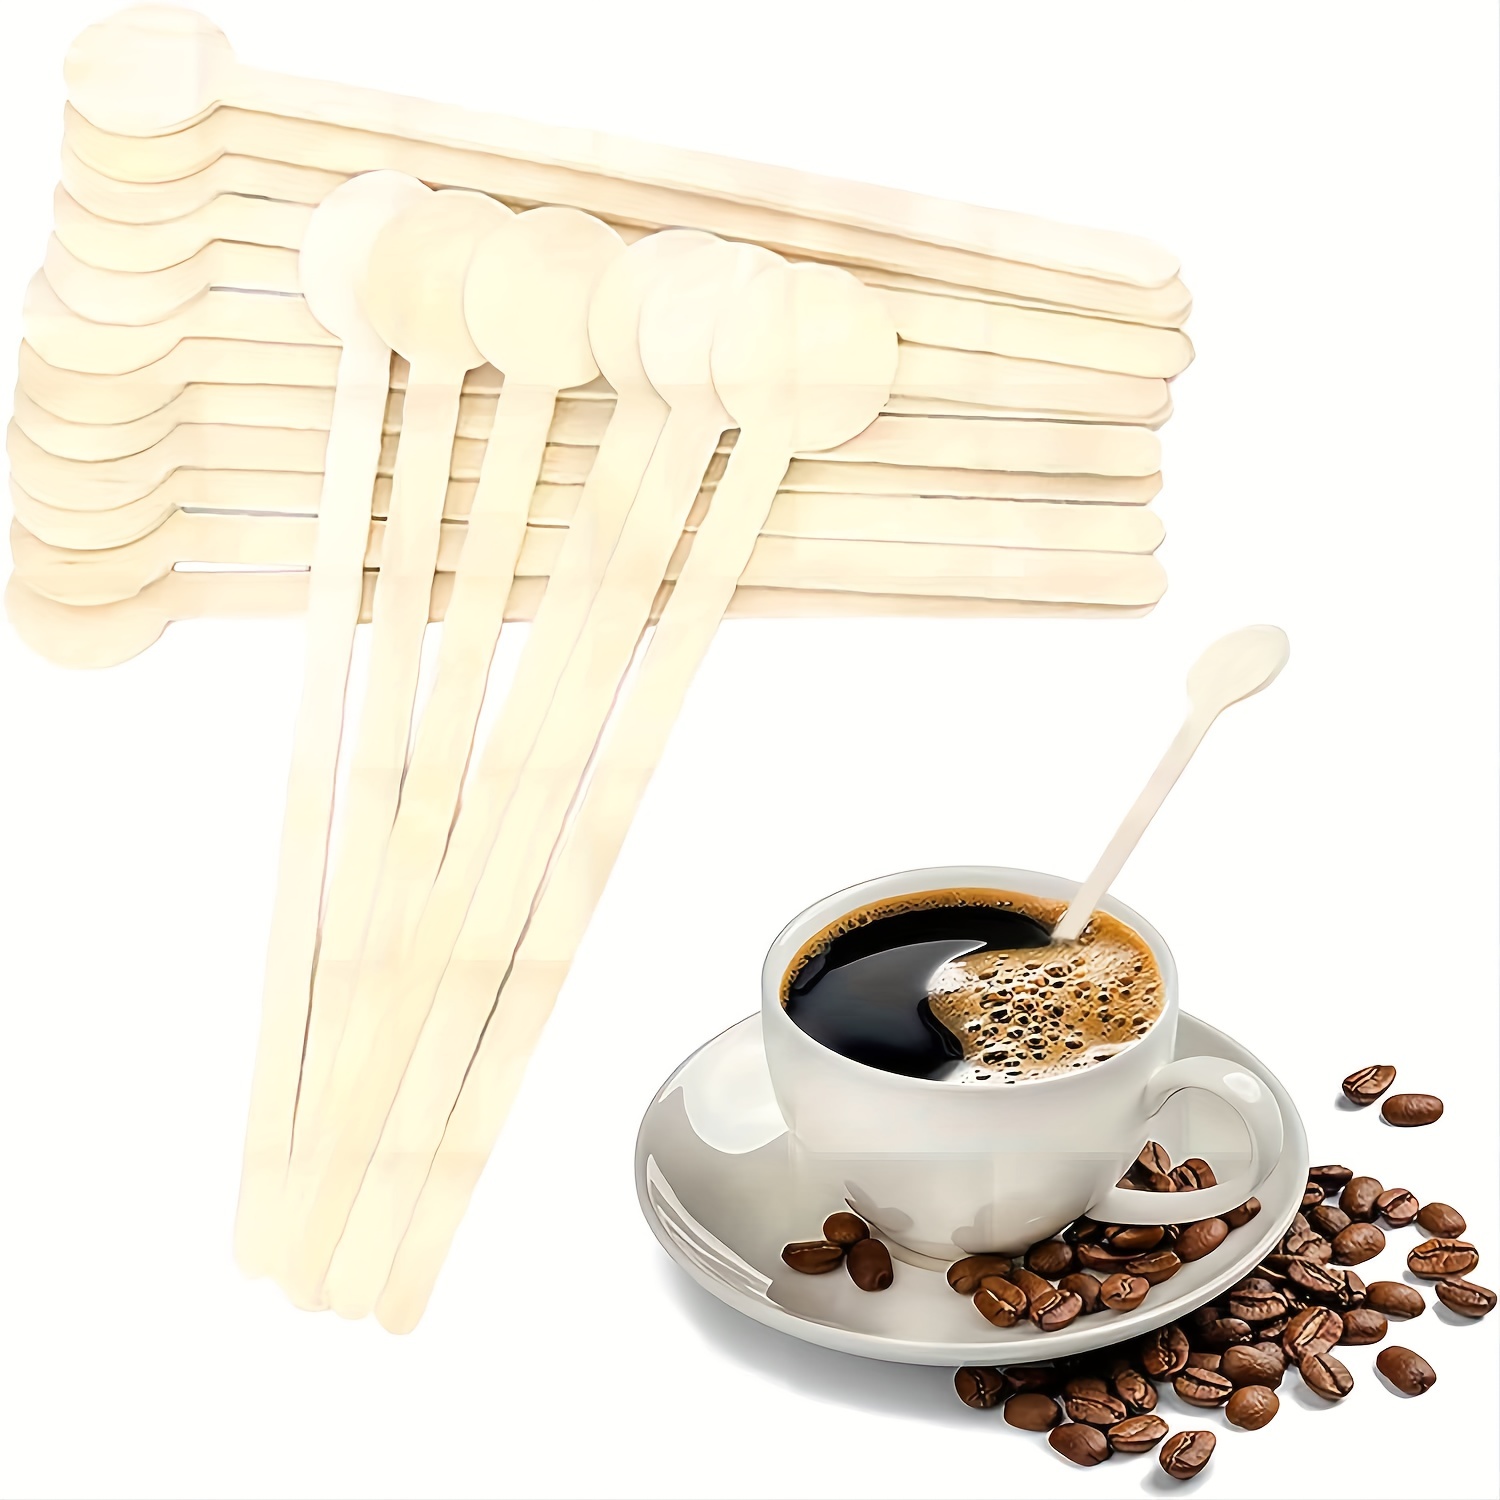 500 Pcs 5 Inch Coffee Stirrer Holder Black Coffee Stir Sticks Holder Stir  Sticks for Coffee Bar Coffee Stirrers Reusable for Mixing Coffee Milk